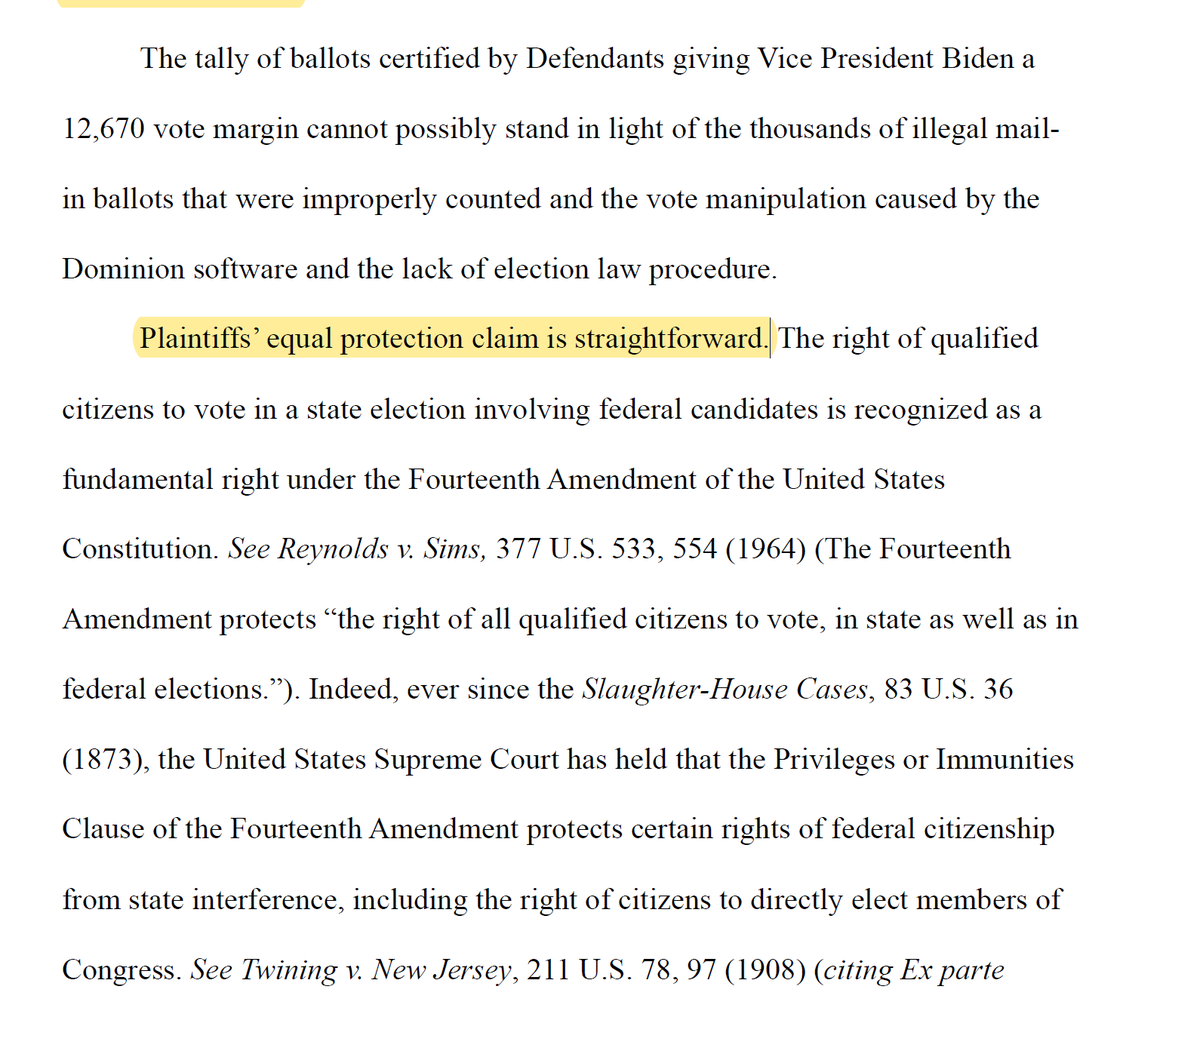 Dafuq it's straightforward. Straightforward doesn't take this damn much text before you're even starting to get to your theory for how the defense violated your equal protection rights.